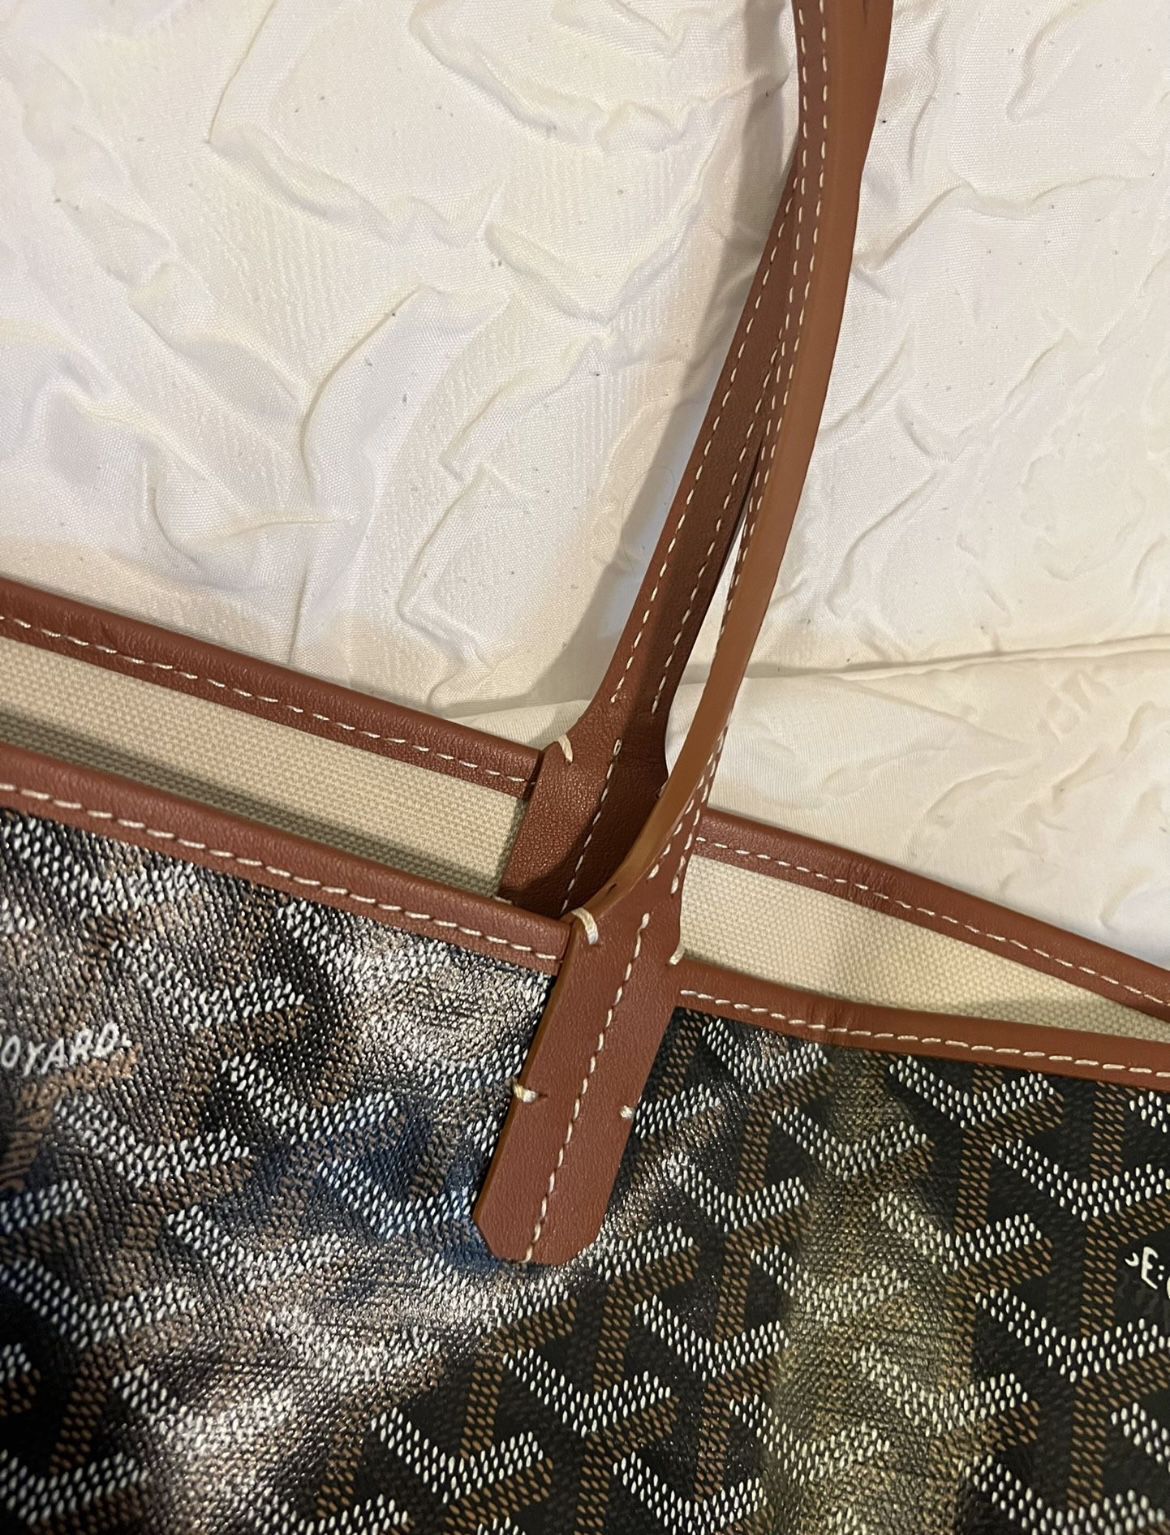 GOYARD Red Saint Louis GM Tote Bag Toile Goyard Rouge w/ Pouch In very good  condition for Sale in Palo Alto, CA - OfferUp